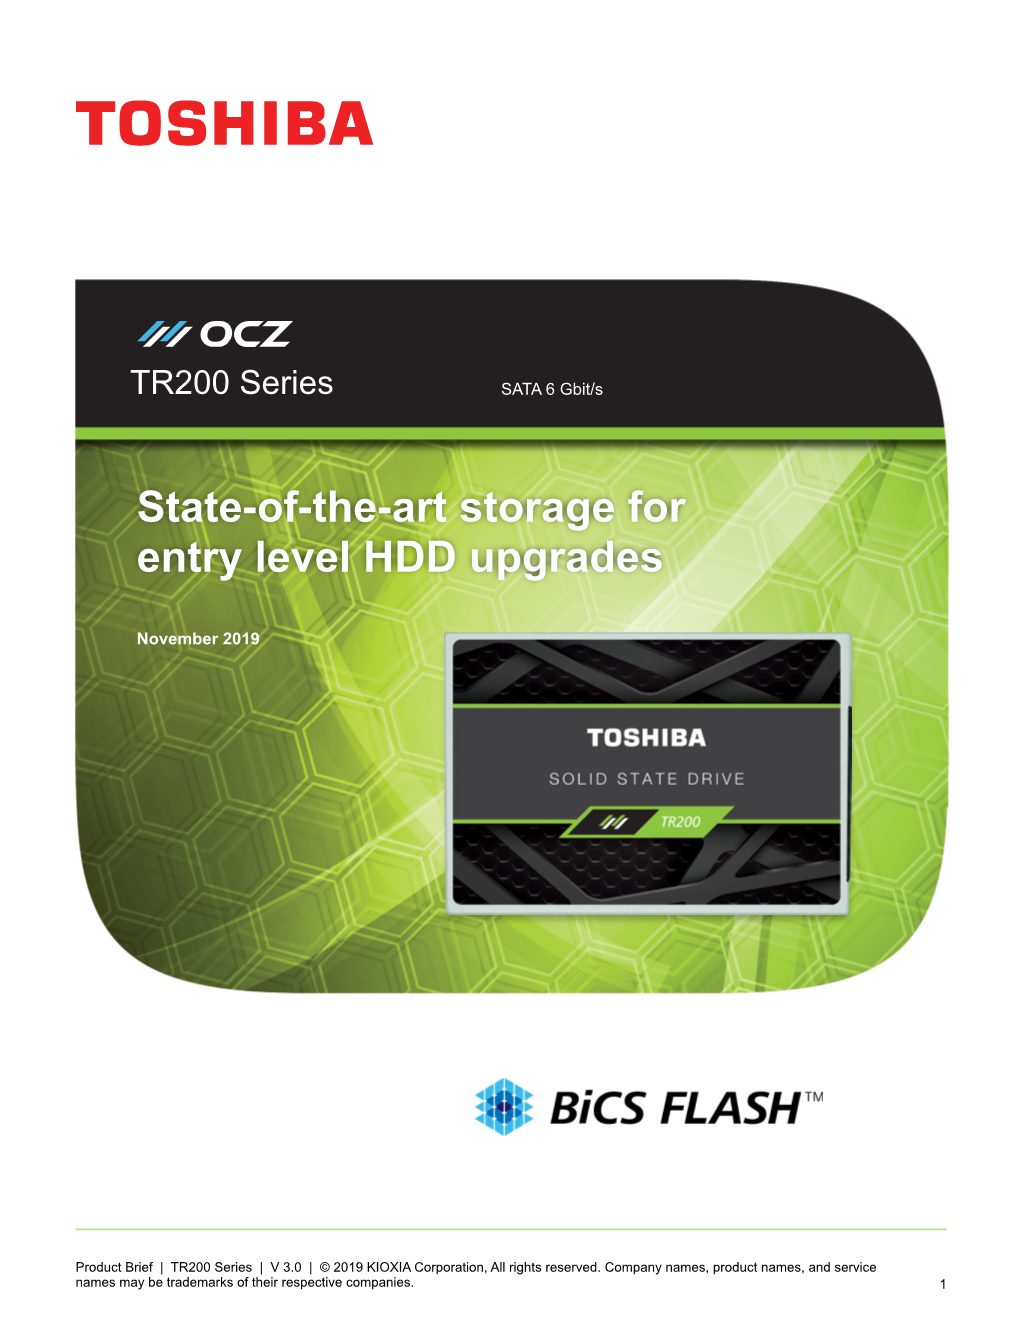 State-Of-The-Art Storage for Entry Level HDD Upgrades